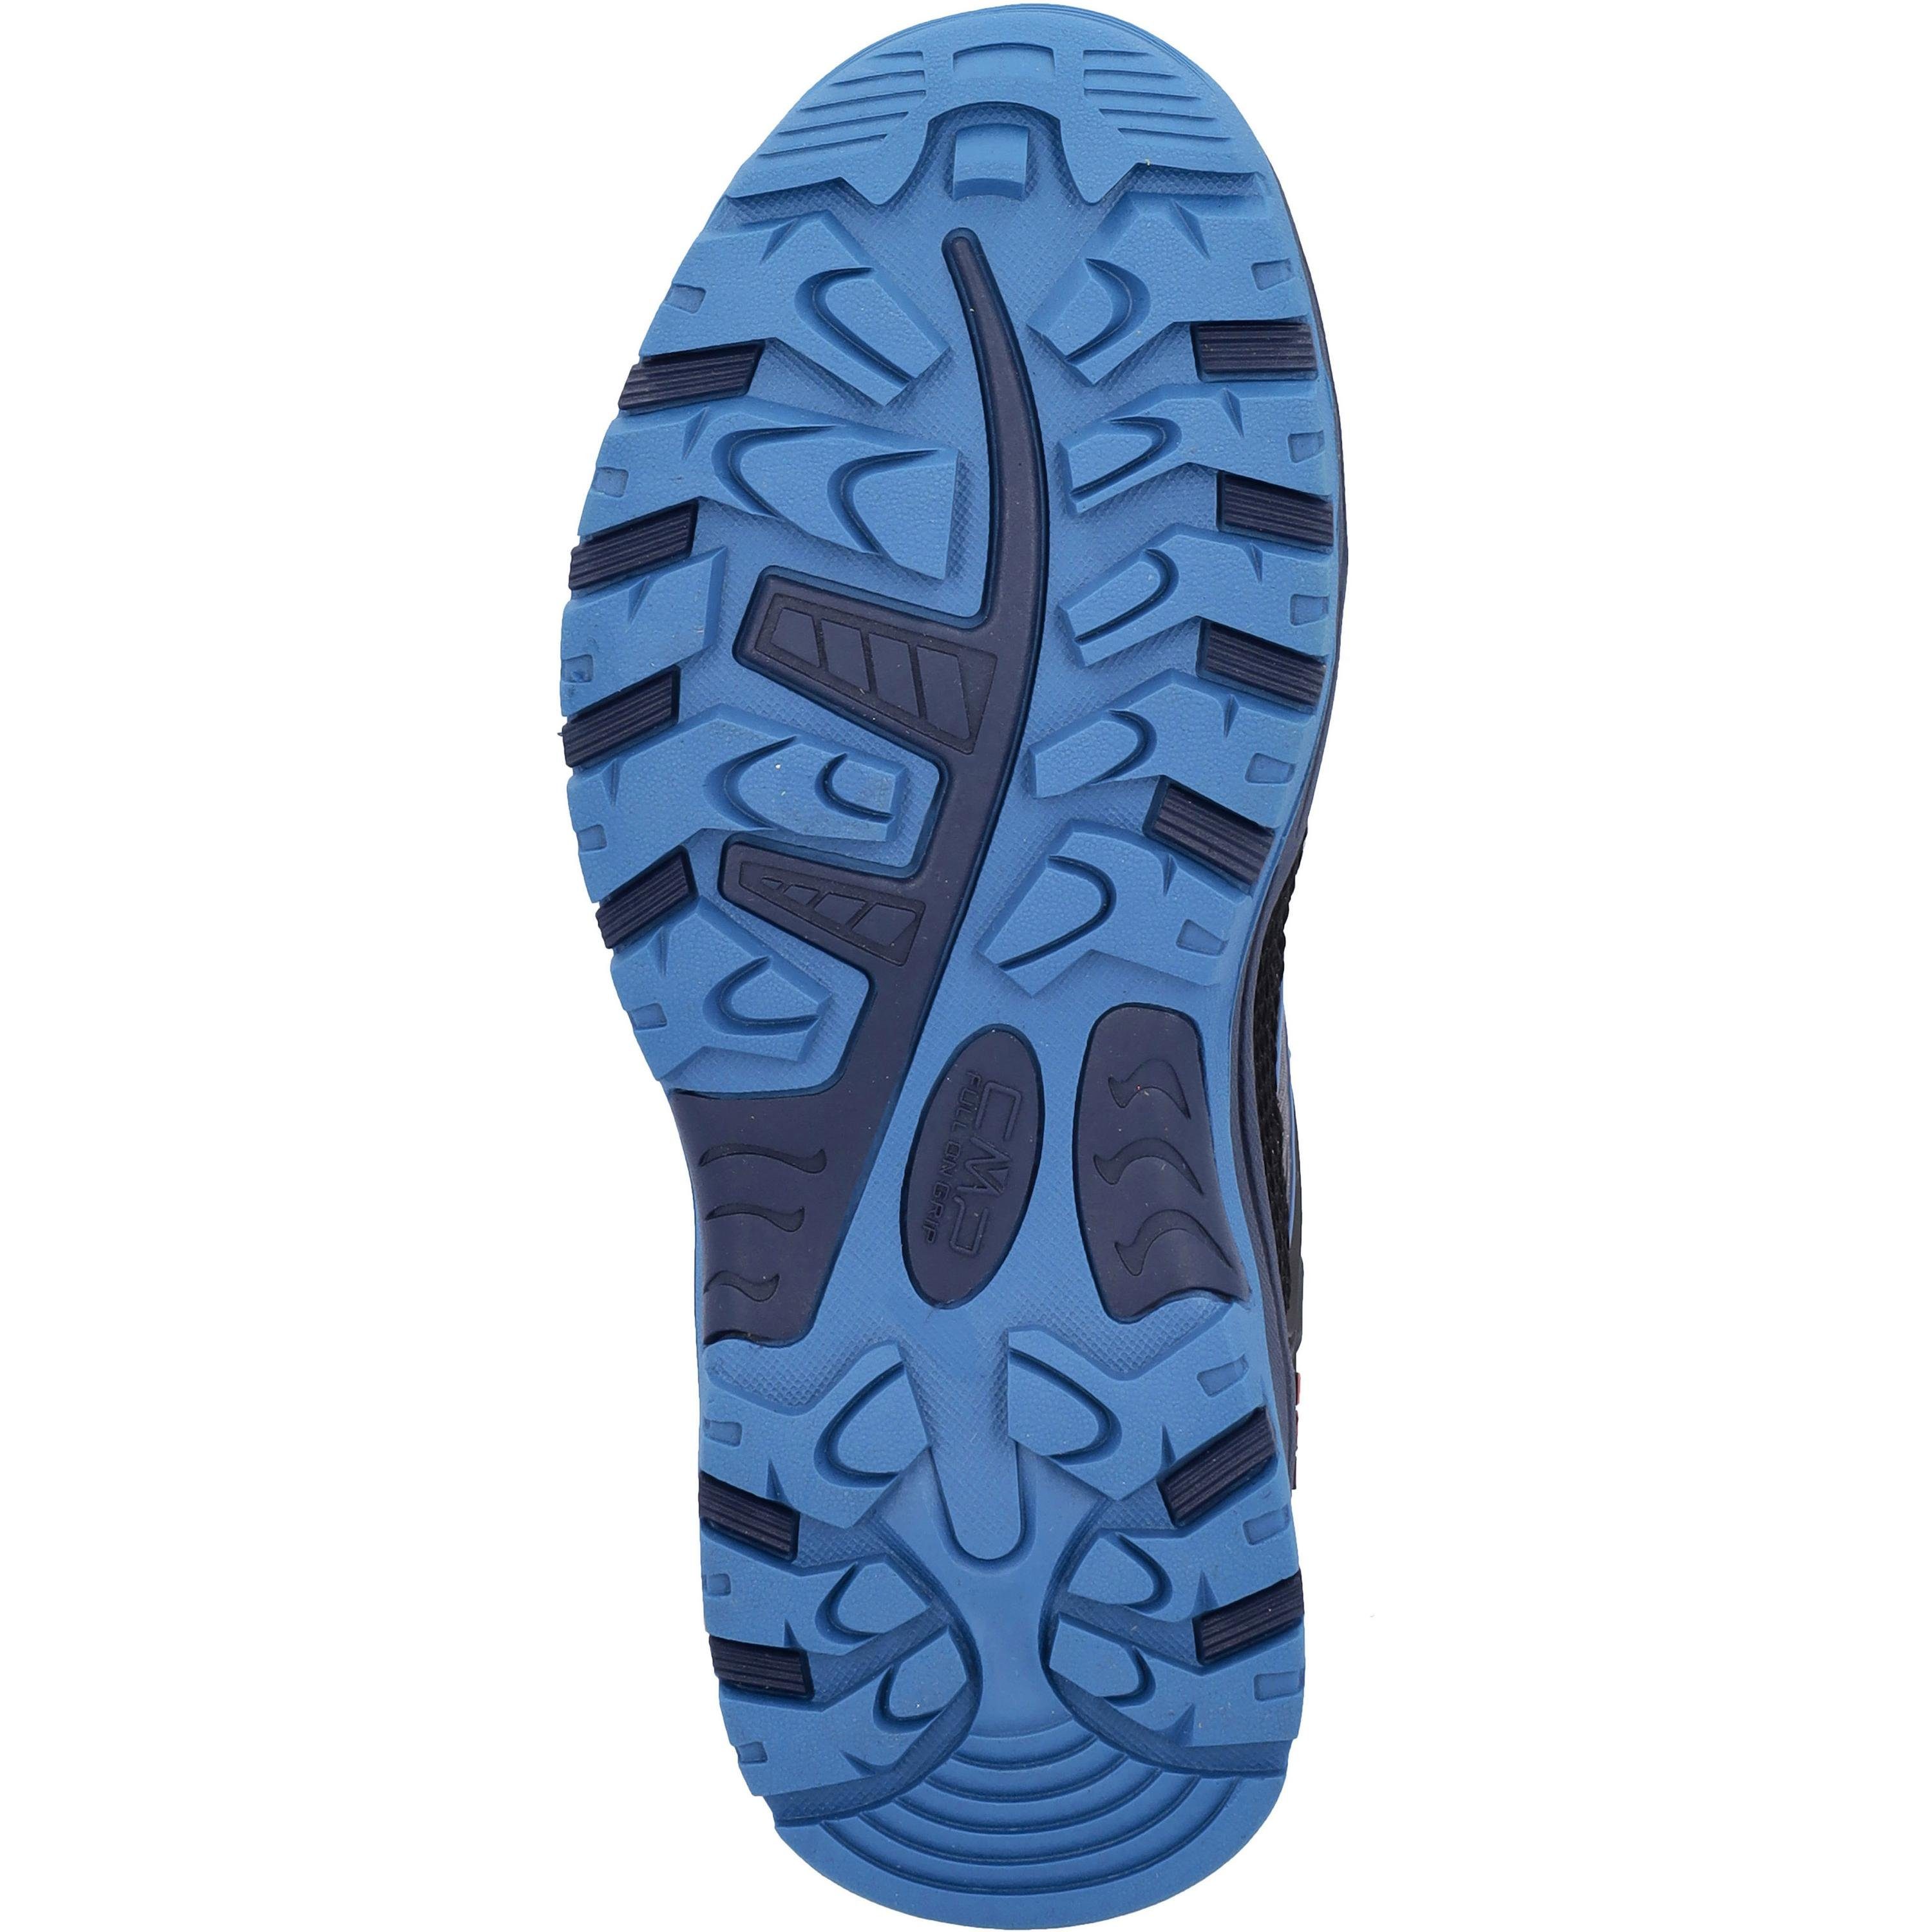 WP Low CMP Rigel Outdoorschuh graffite-oltremare